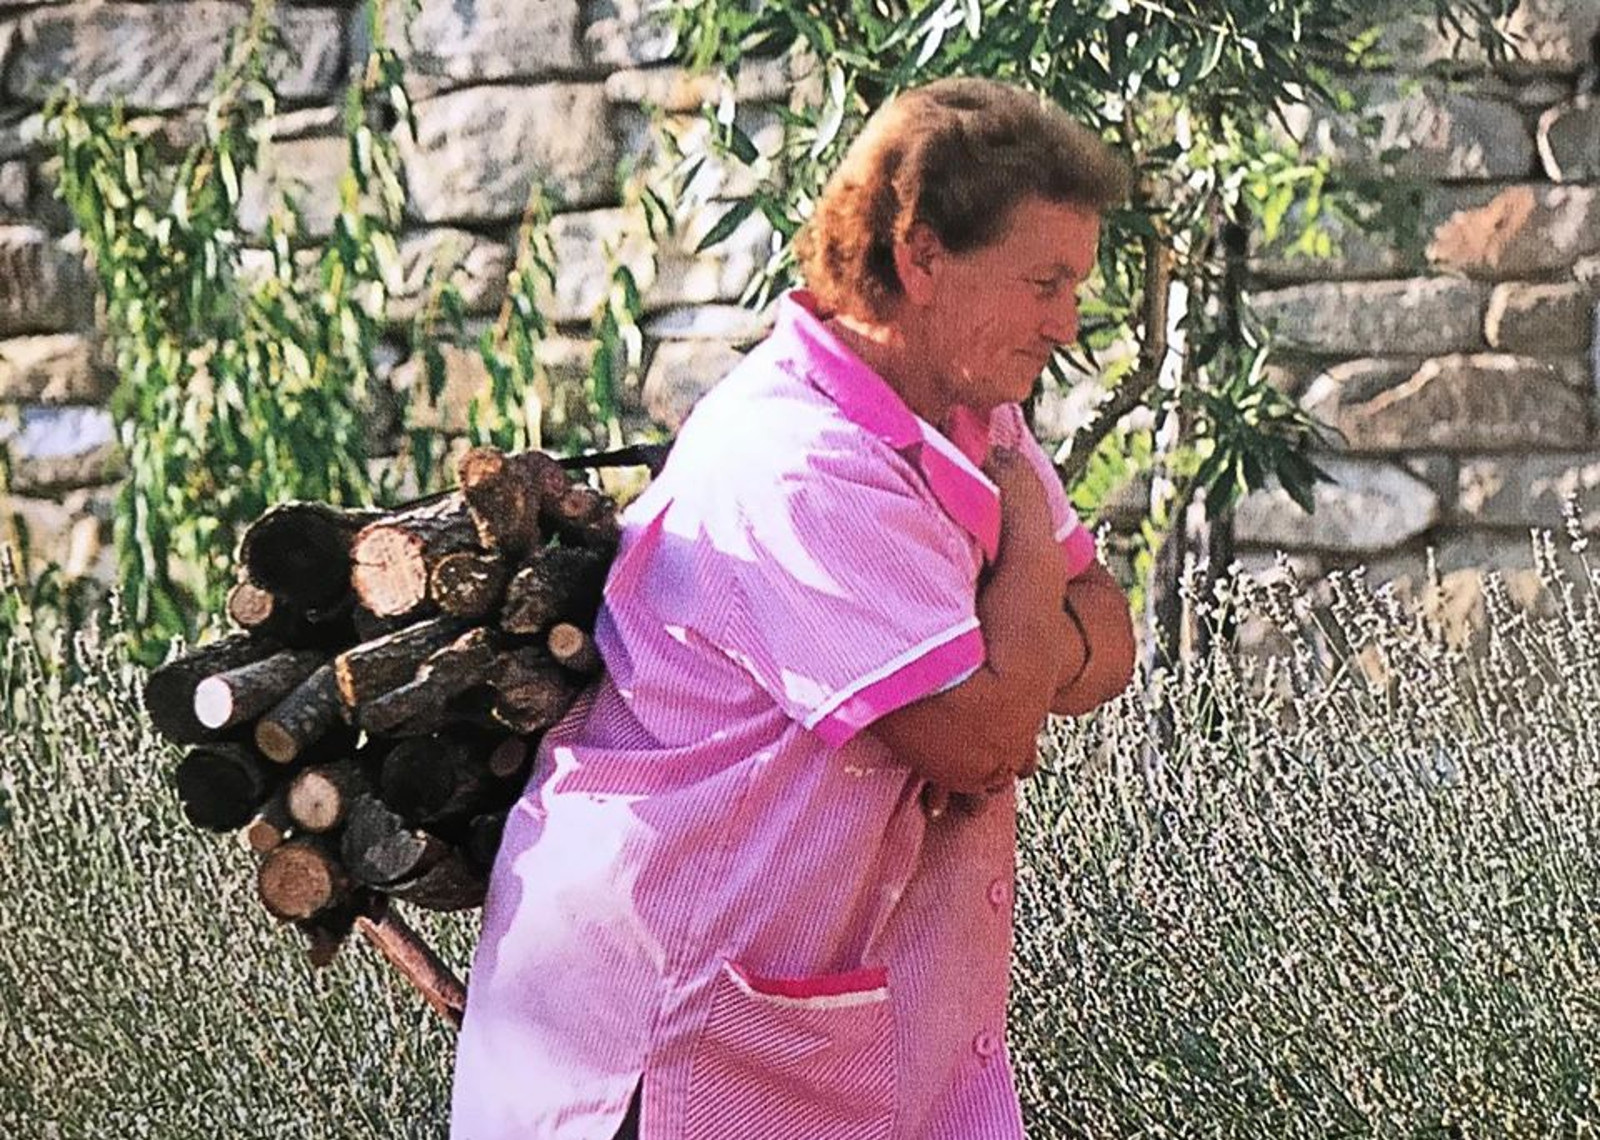 Dina Fragai carrying wood on her shoulders